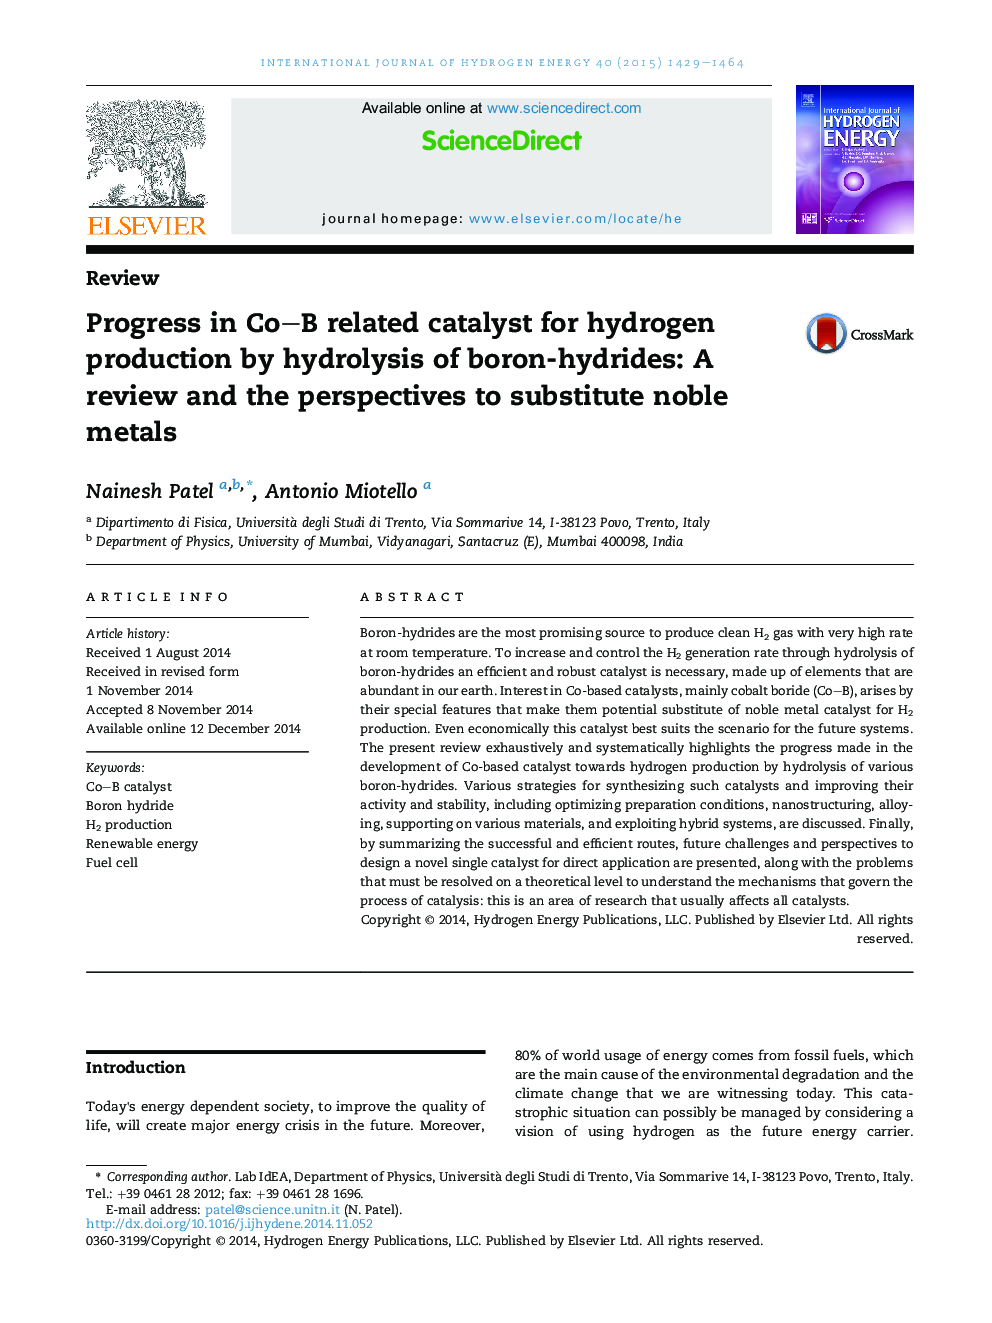 Progress in Co–B related catalyst for hydrogen production by hydrolysis of boron-hydrides: A review and the perspectives to substitute noble metals